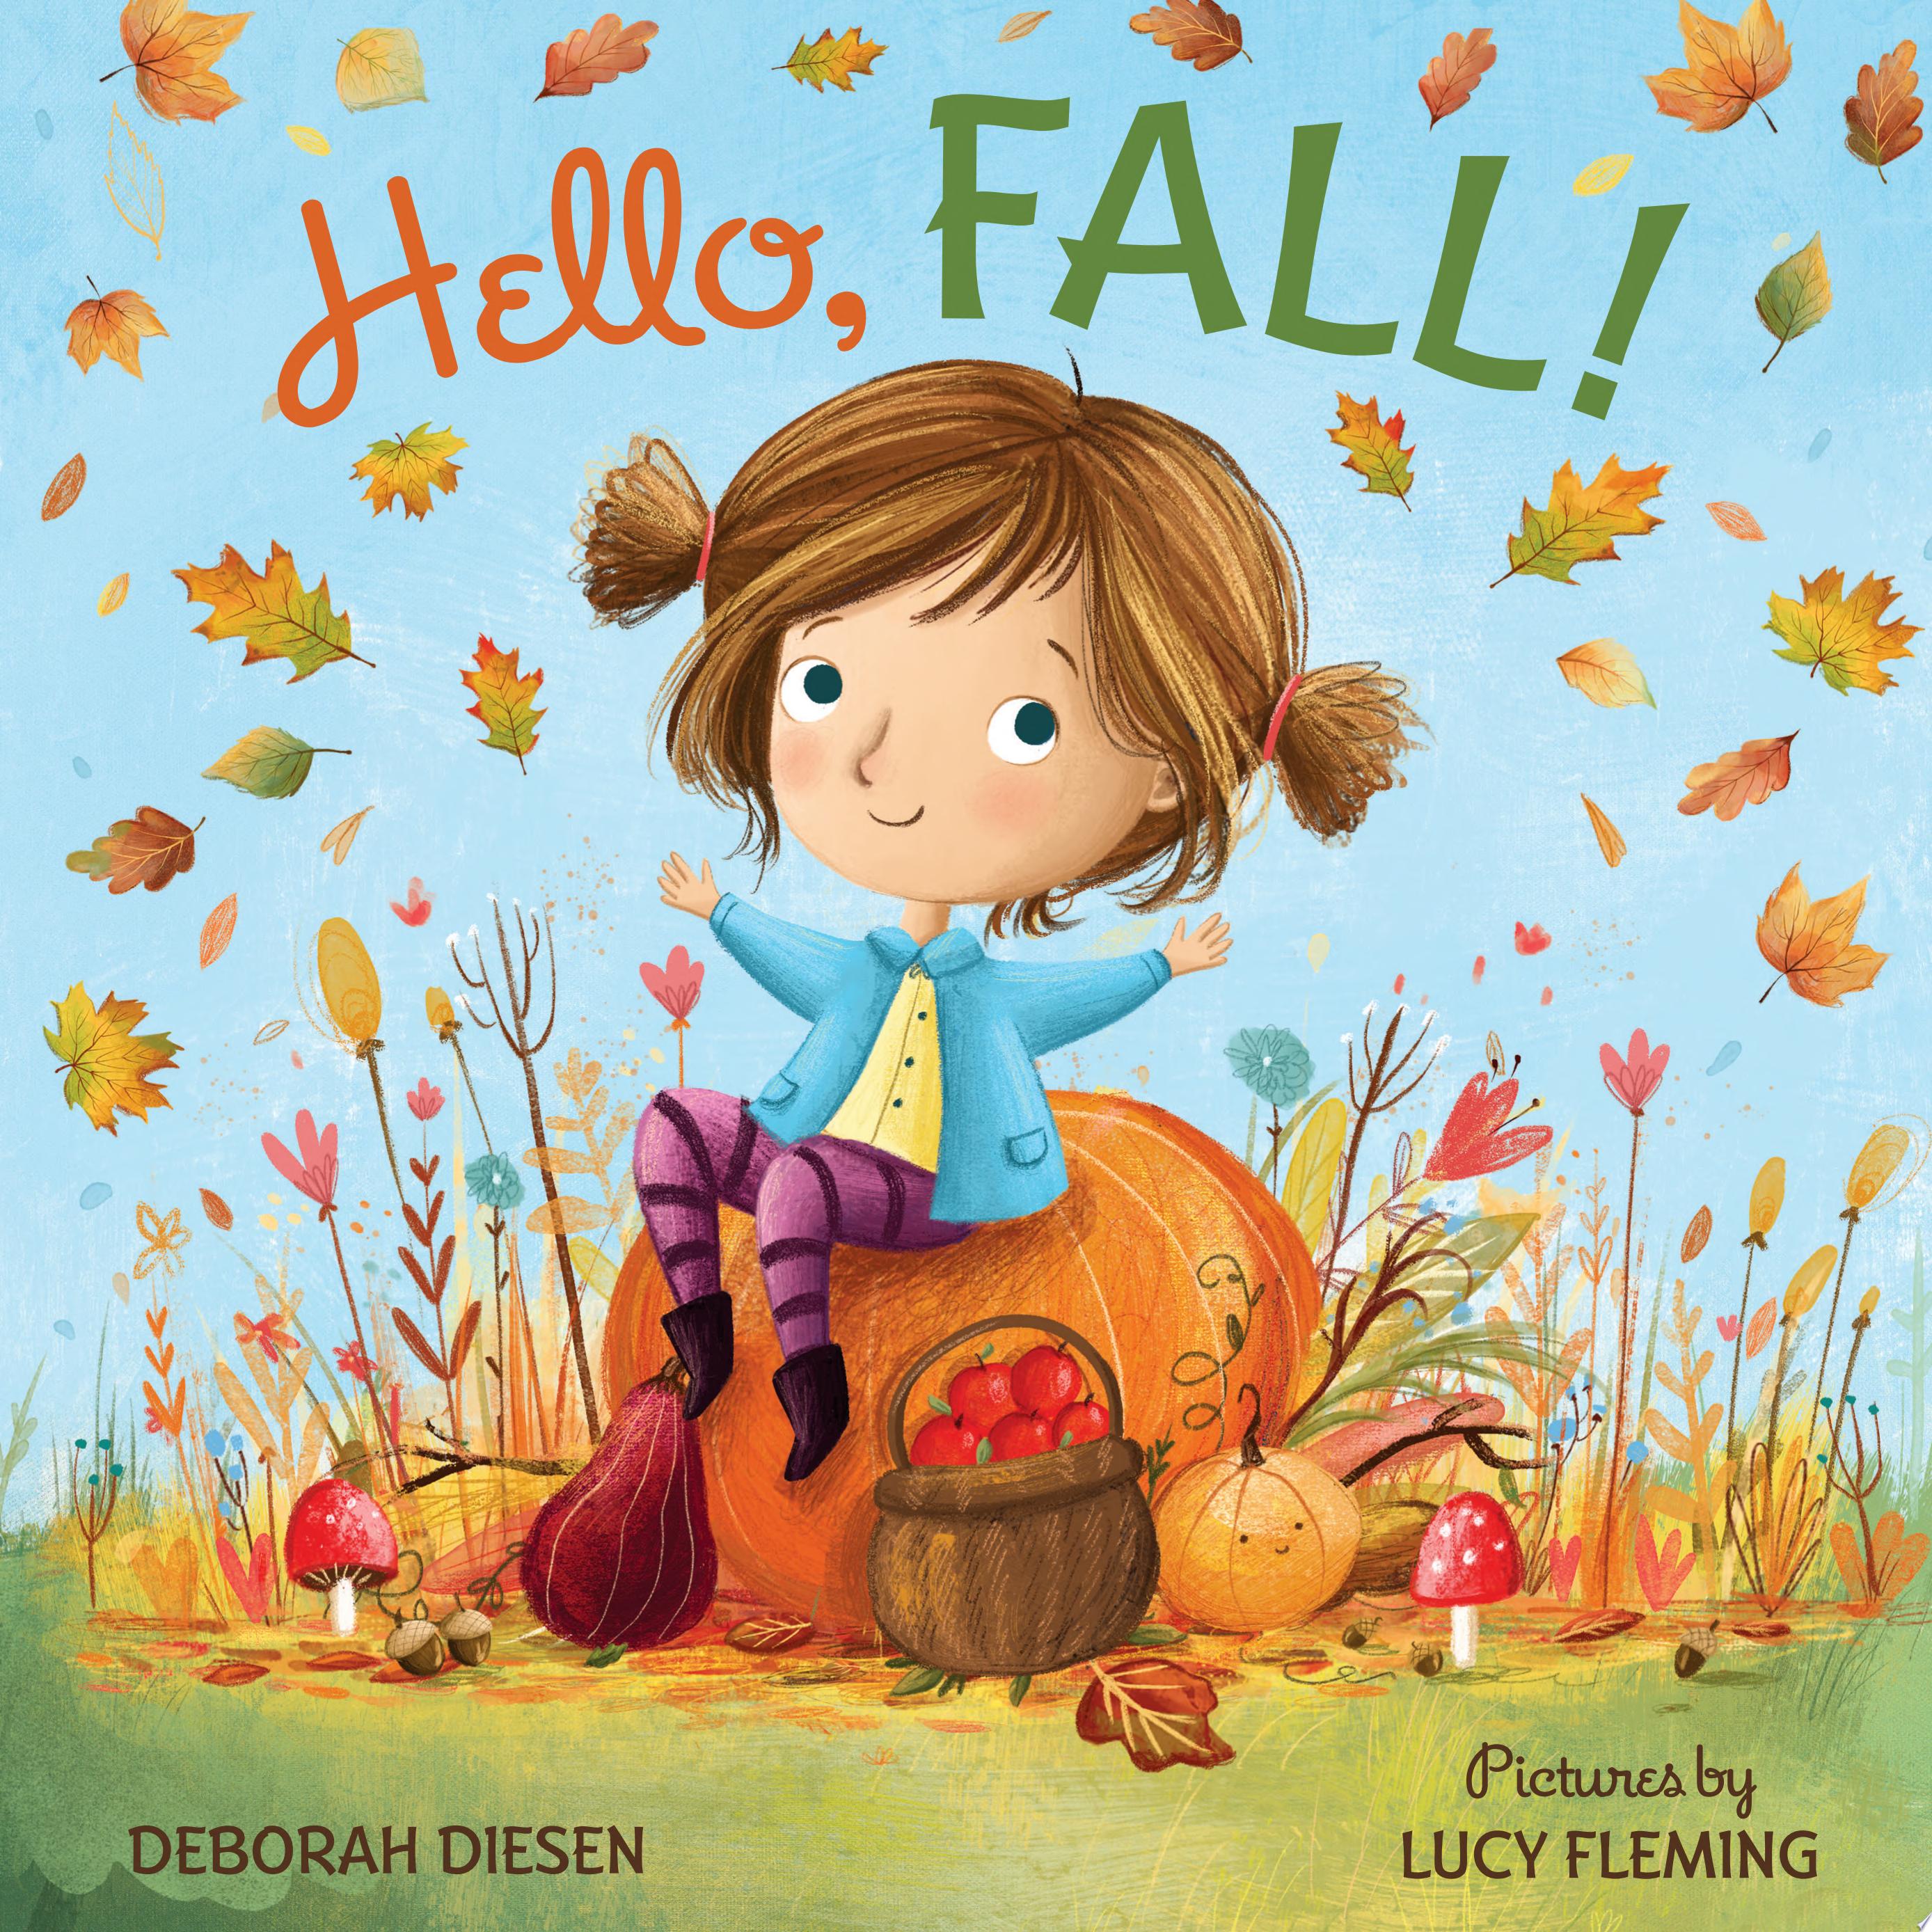 Image for "Hello, Fall!"